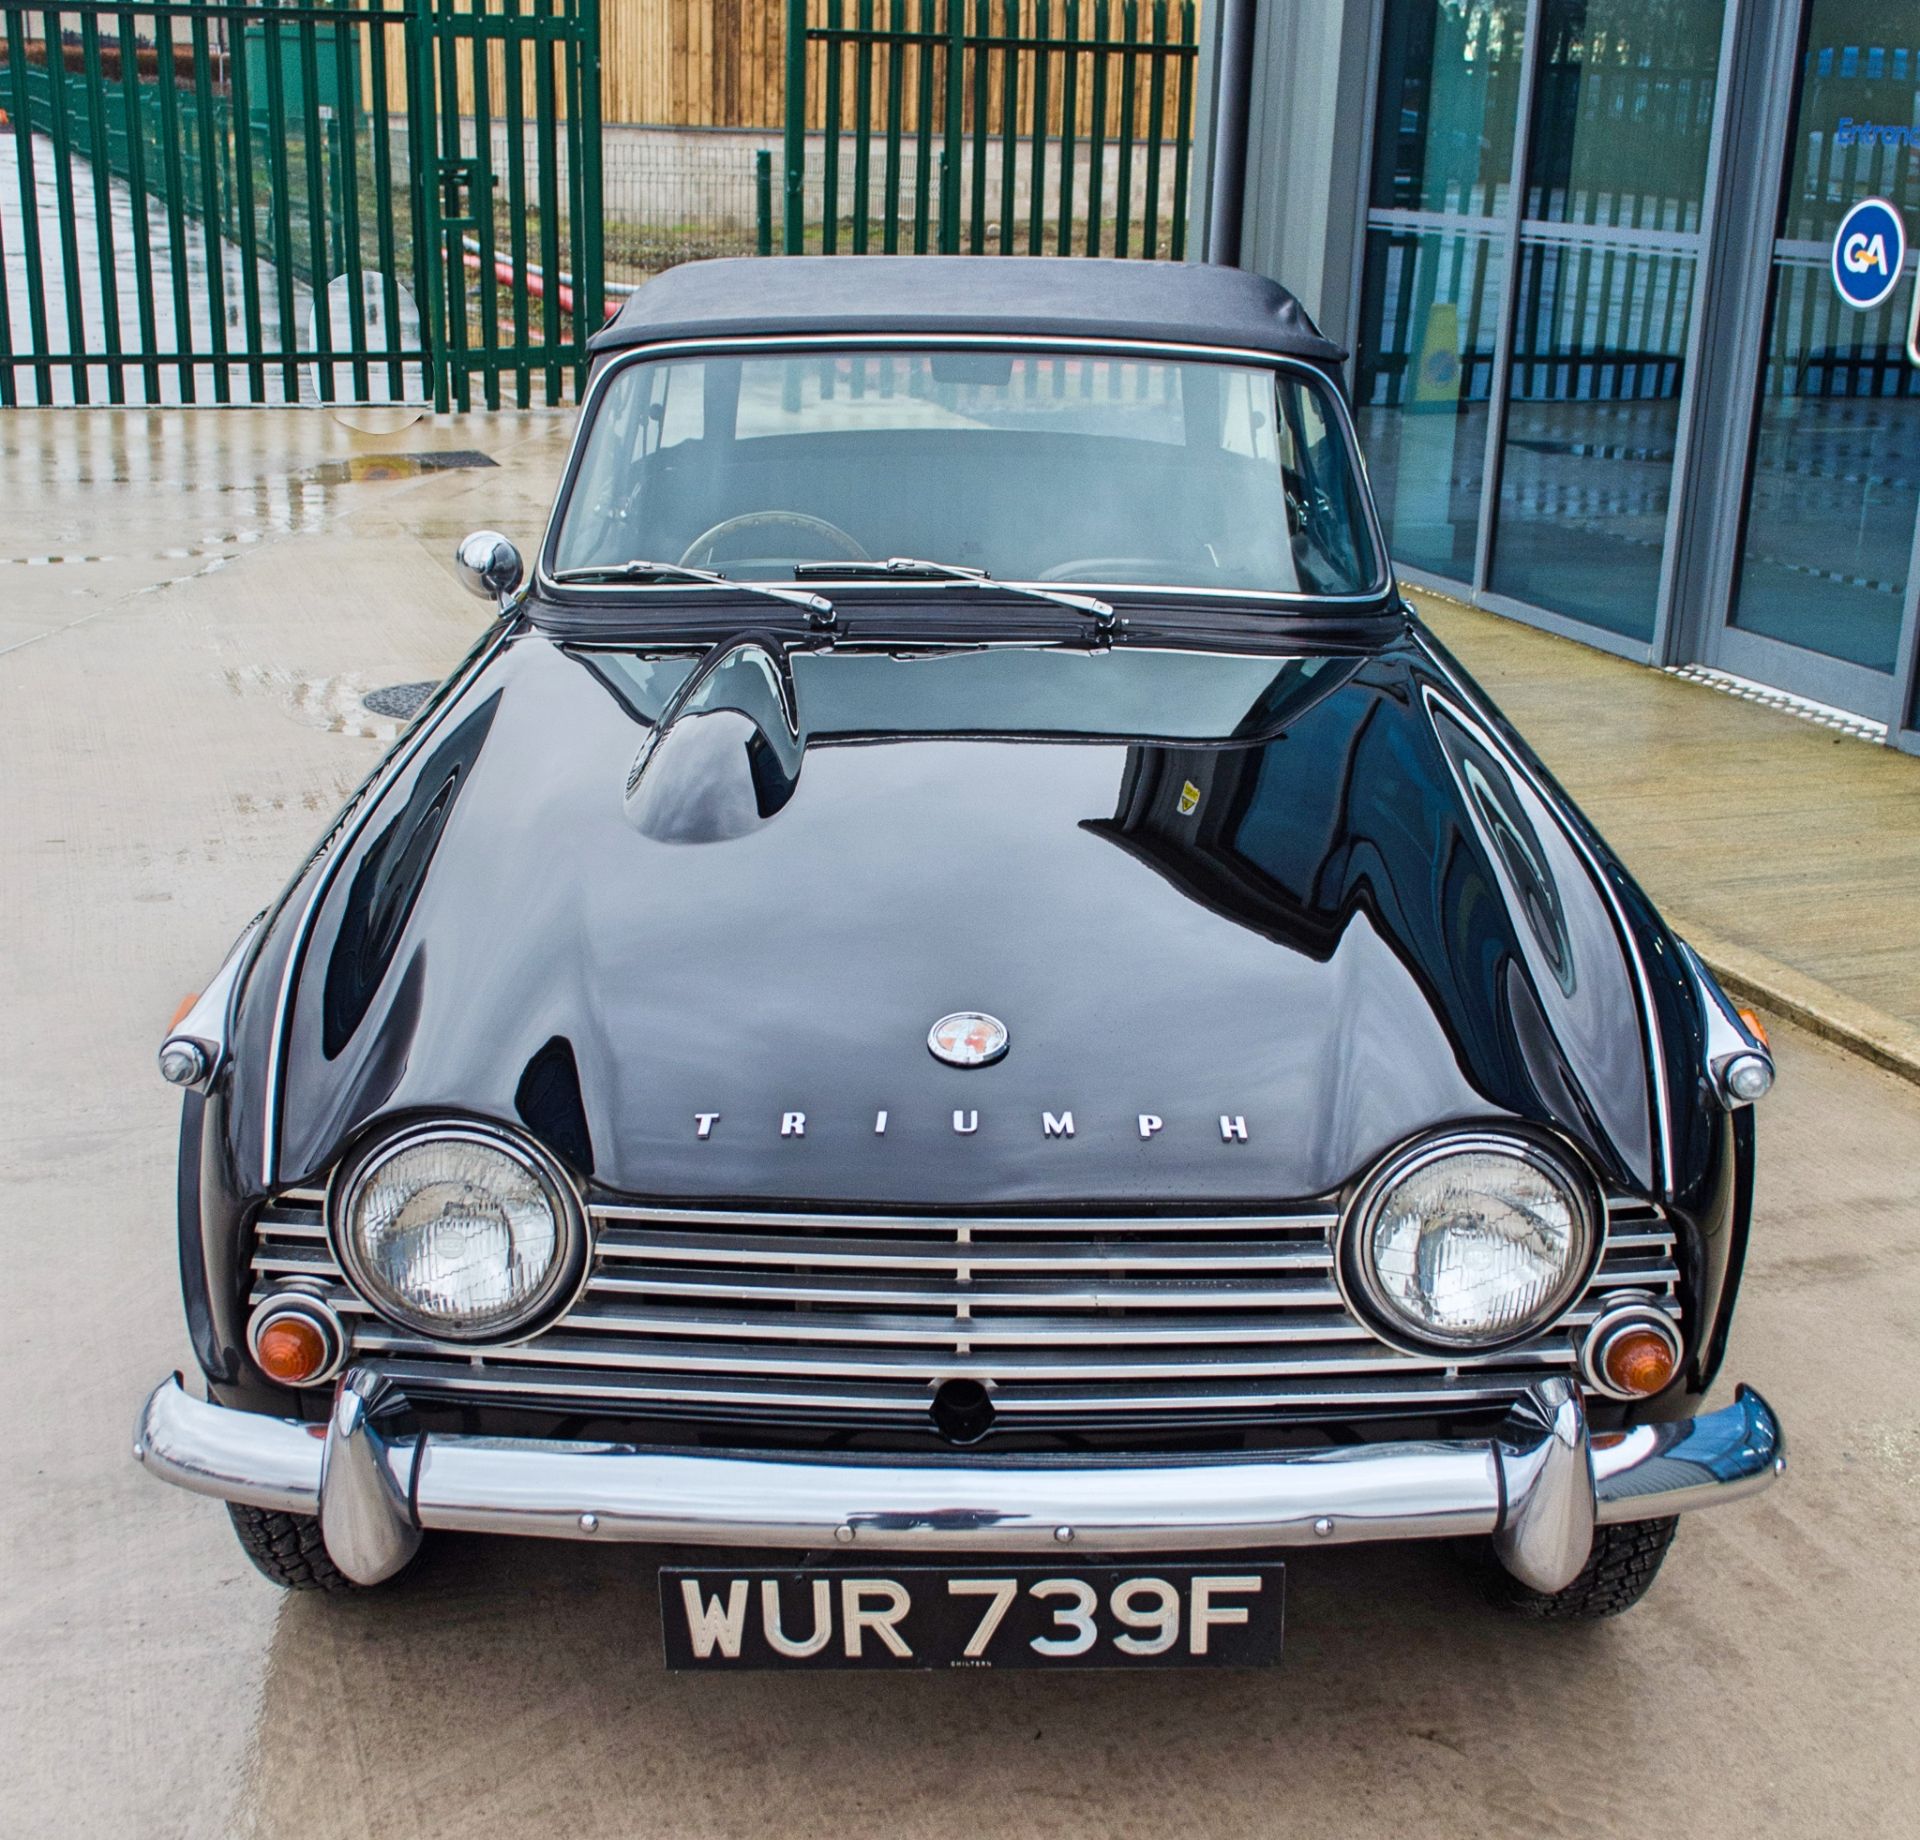 1967 Triumph TR4A IRS 2135cc convertible - Image 26 of 56